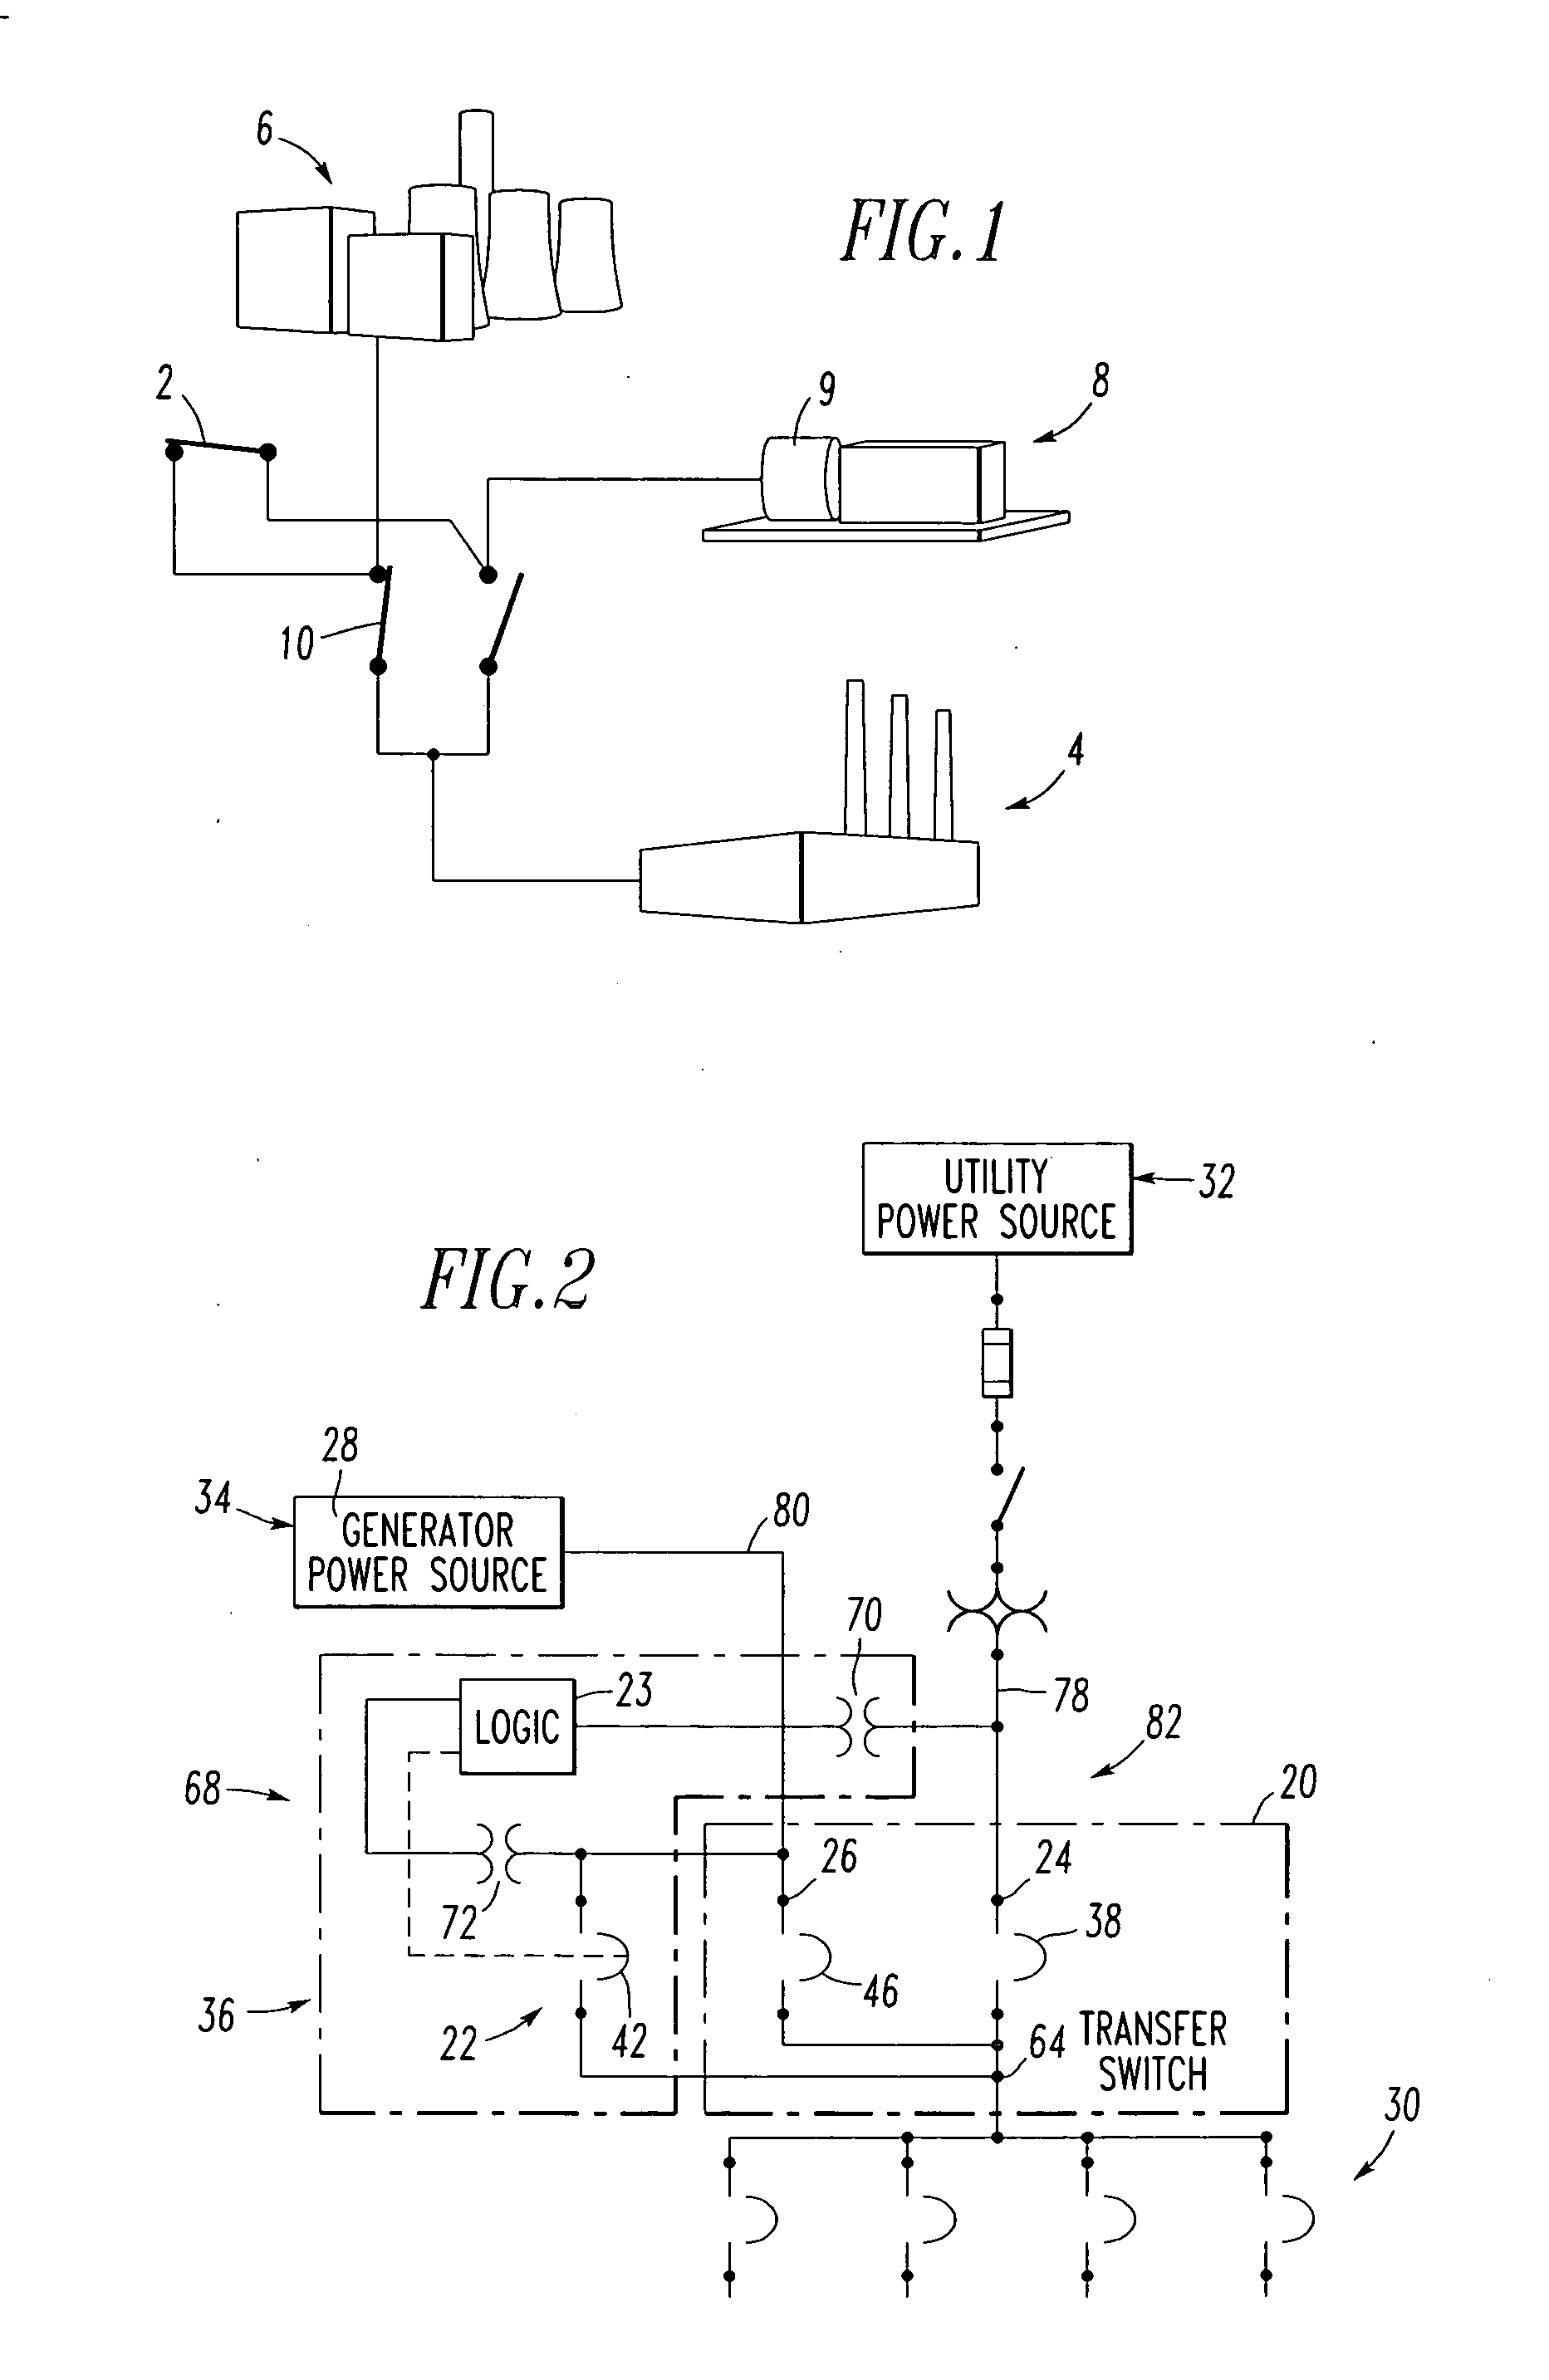 Retrofit kit for converting a transfer switch to a switch for soft-load transfer, and soft-load power distribution system and method